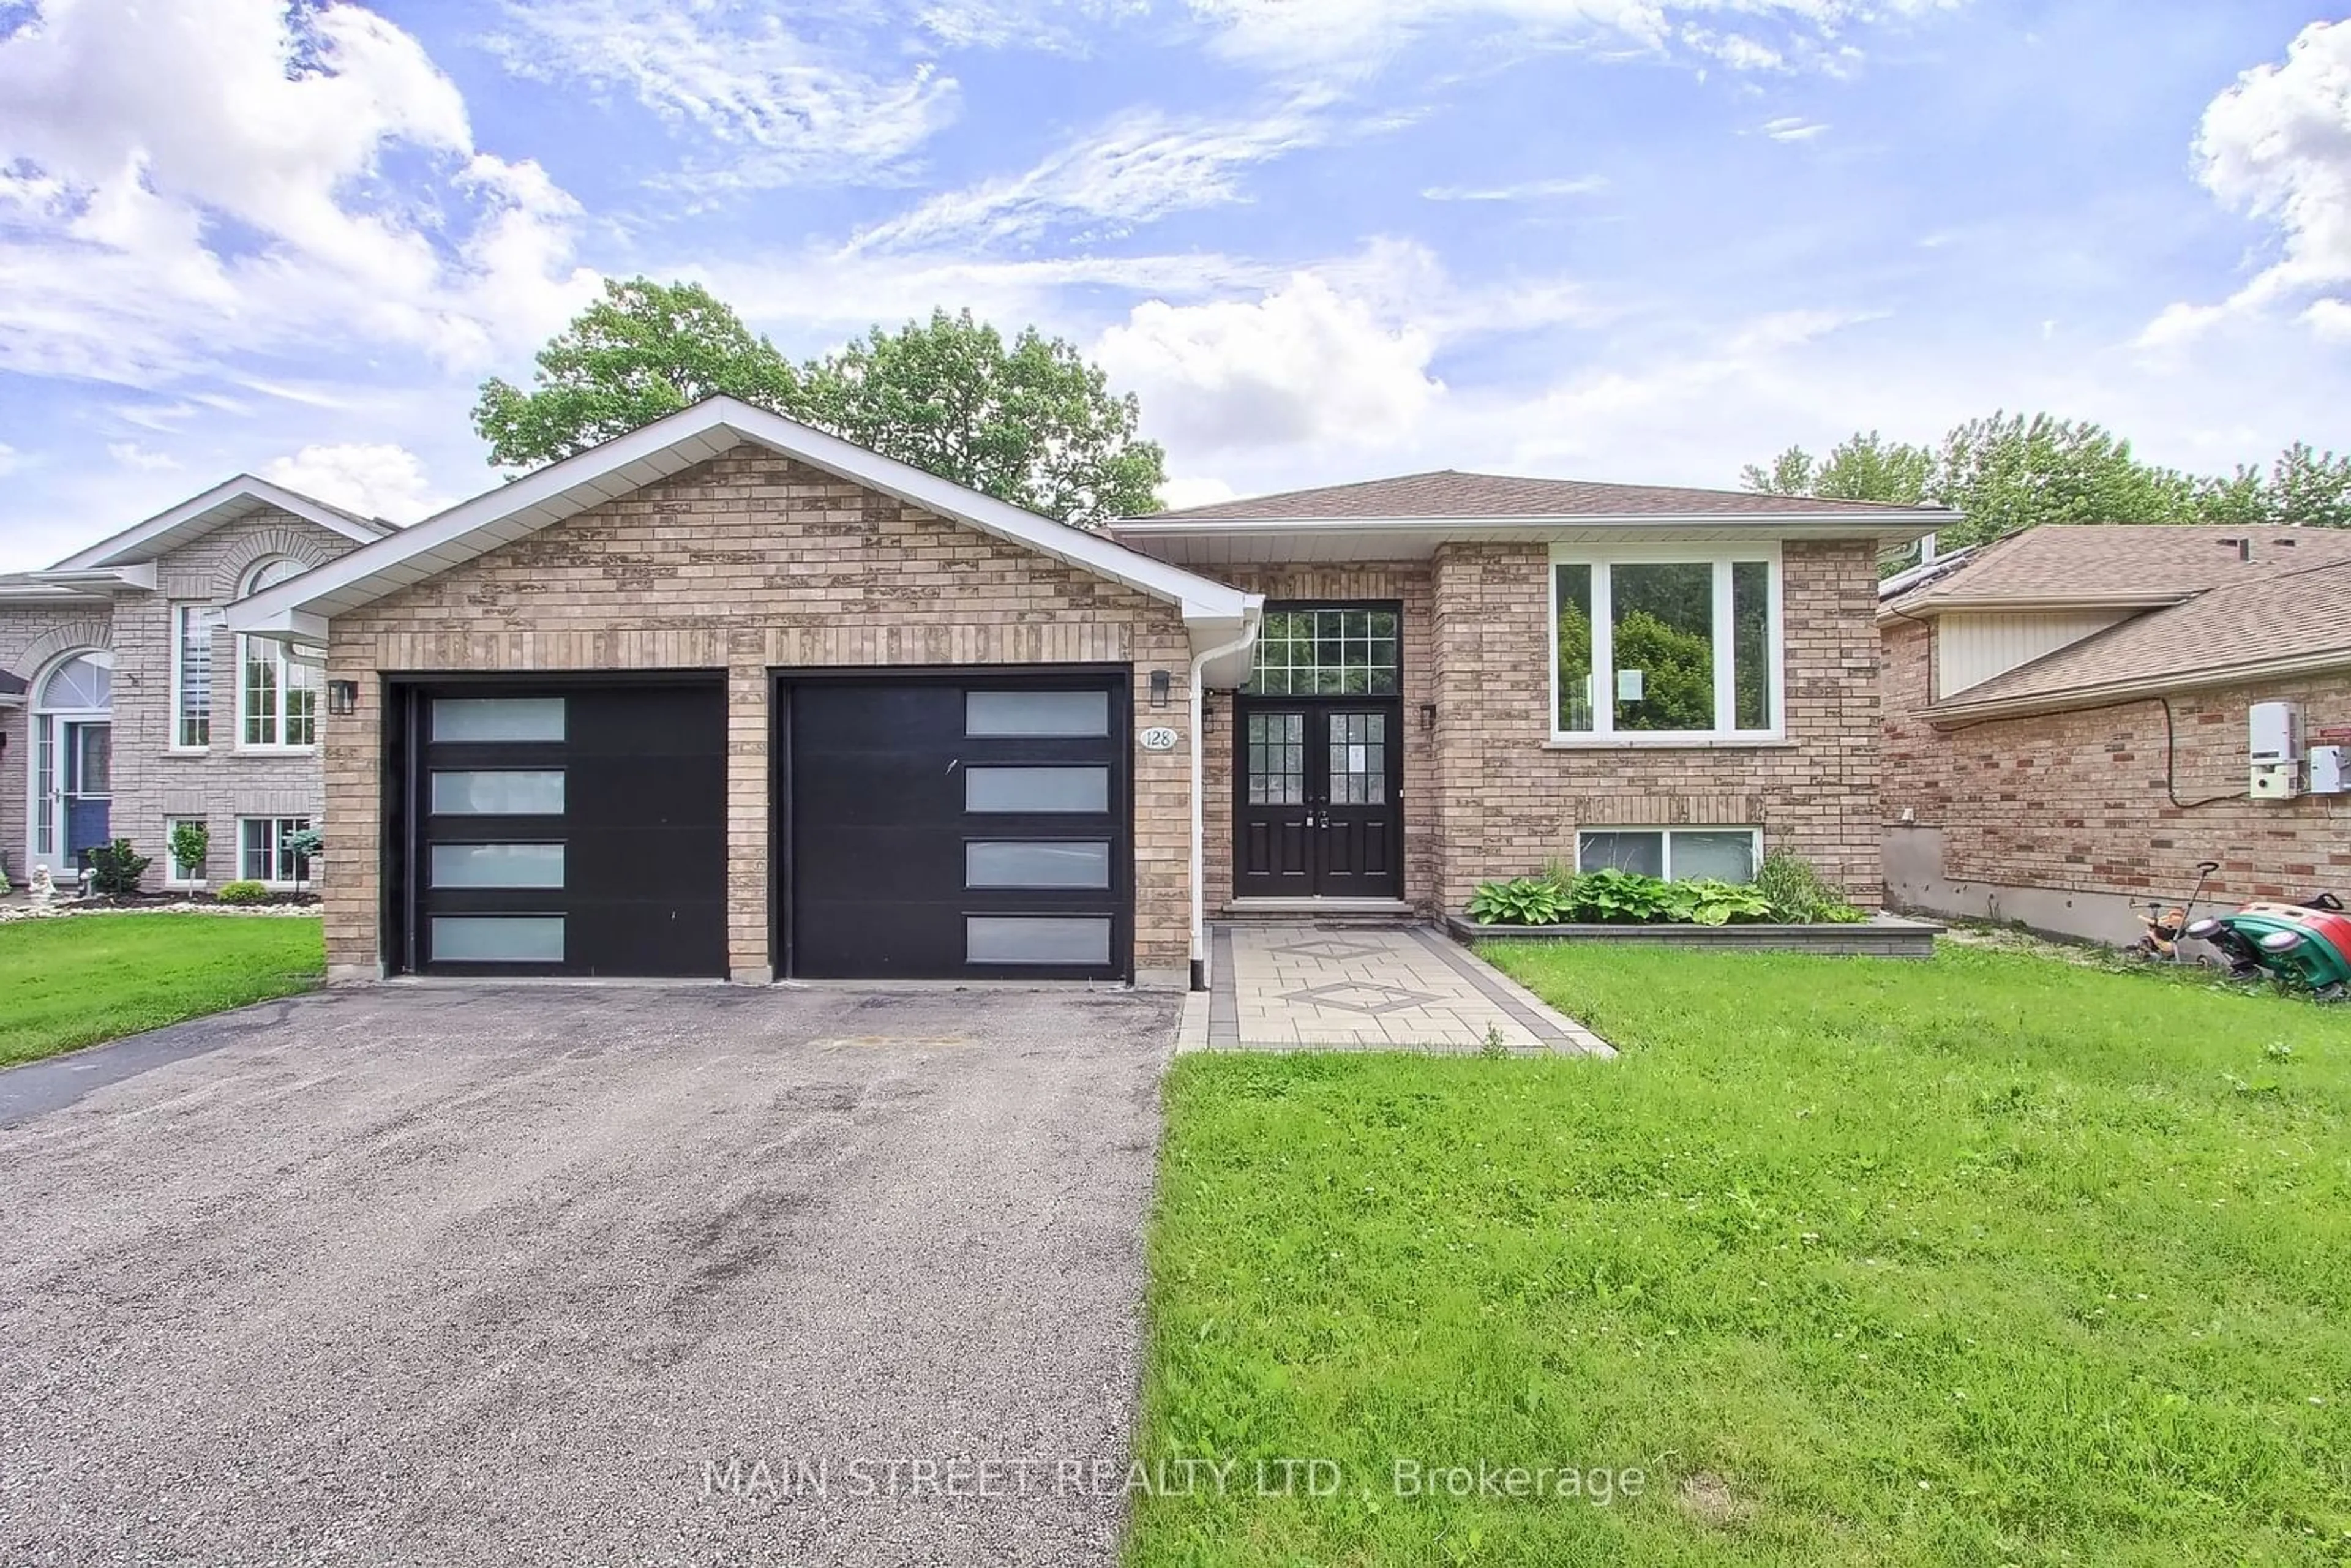 Home with brick exterior material for 128 Emms Dr, Barrie Ontario L4N 8H7